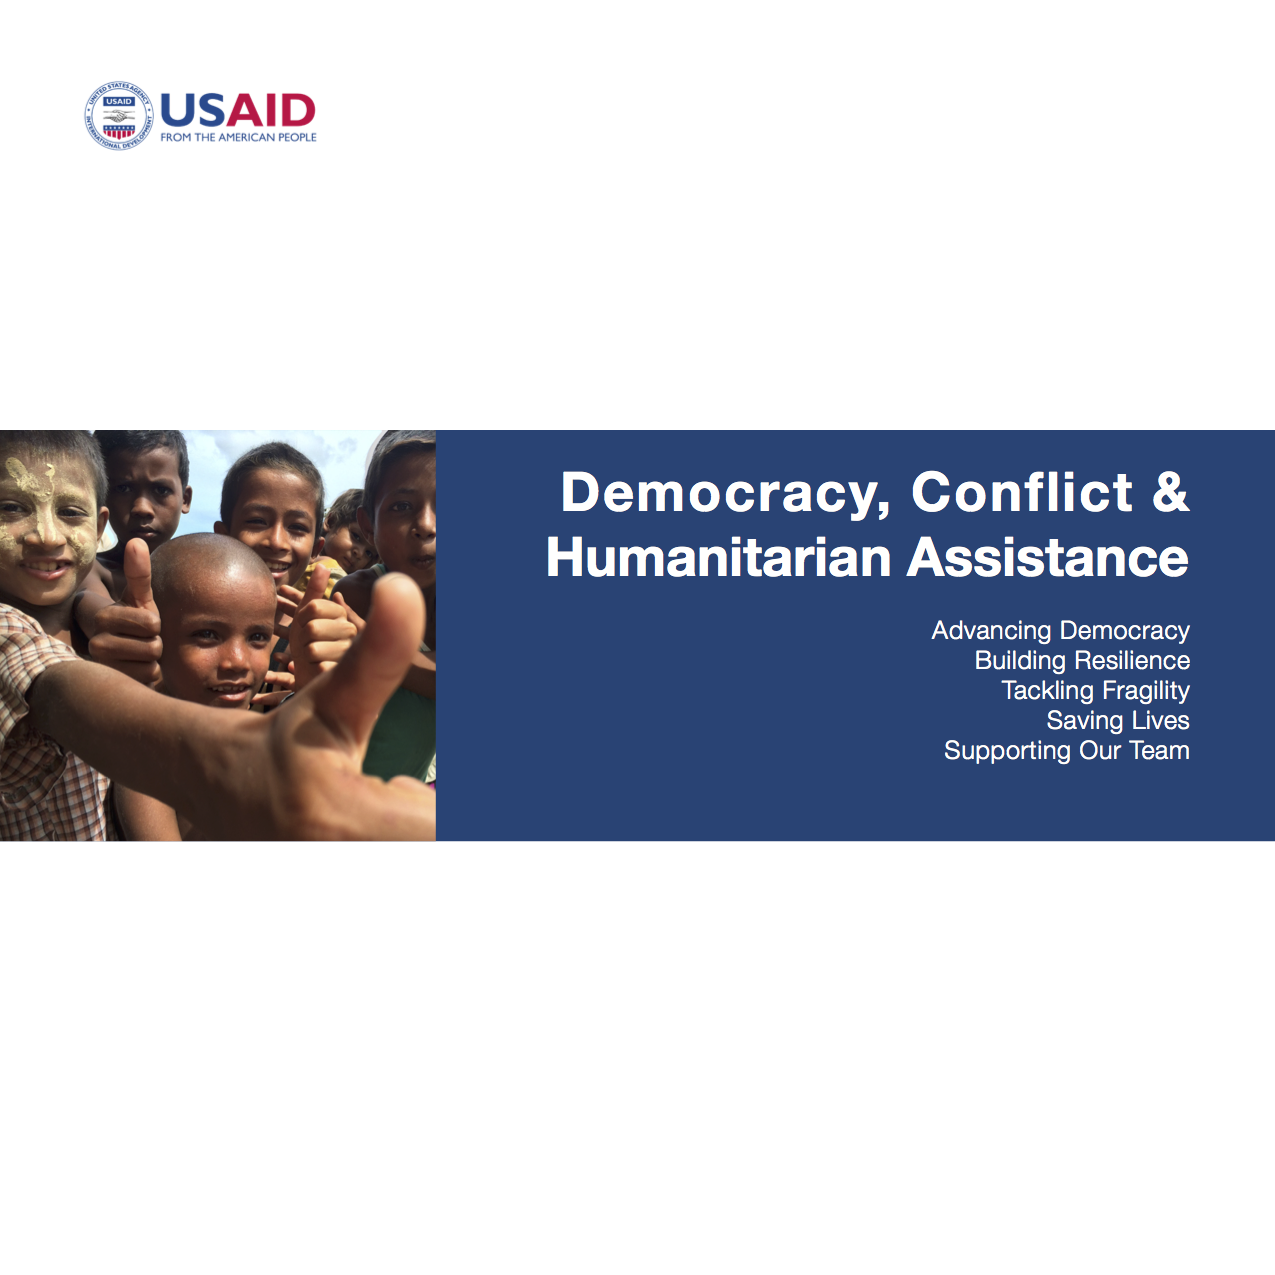 Democracy, Conflict, and Humanitarian Assistance: Advancing Democracy, Building Resilience, Tackling Fragility, Saving Lives.